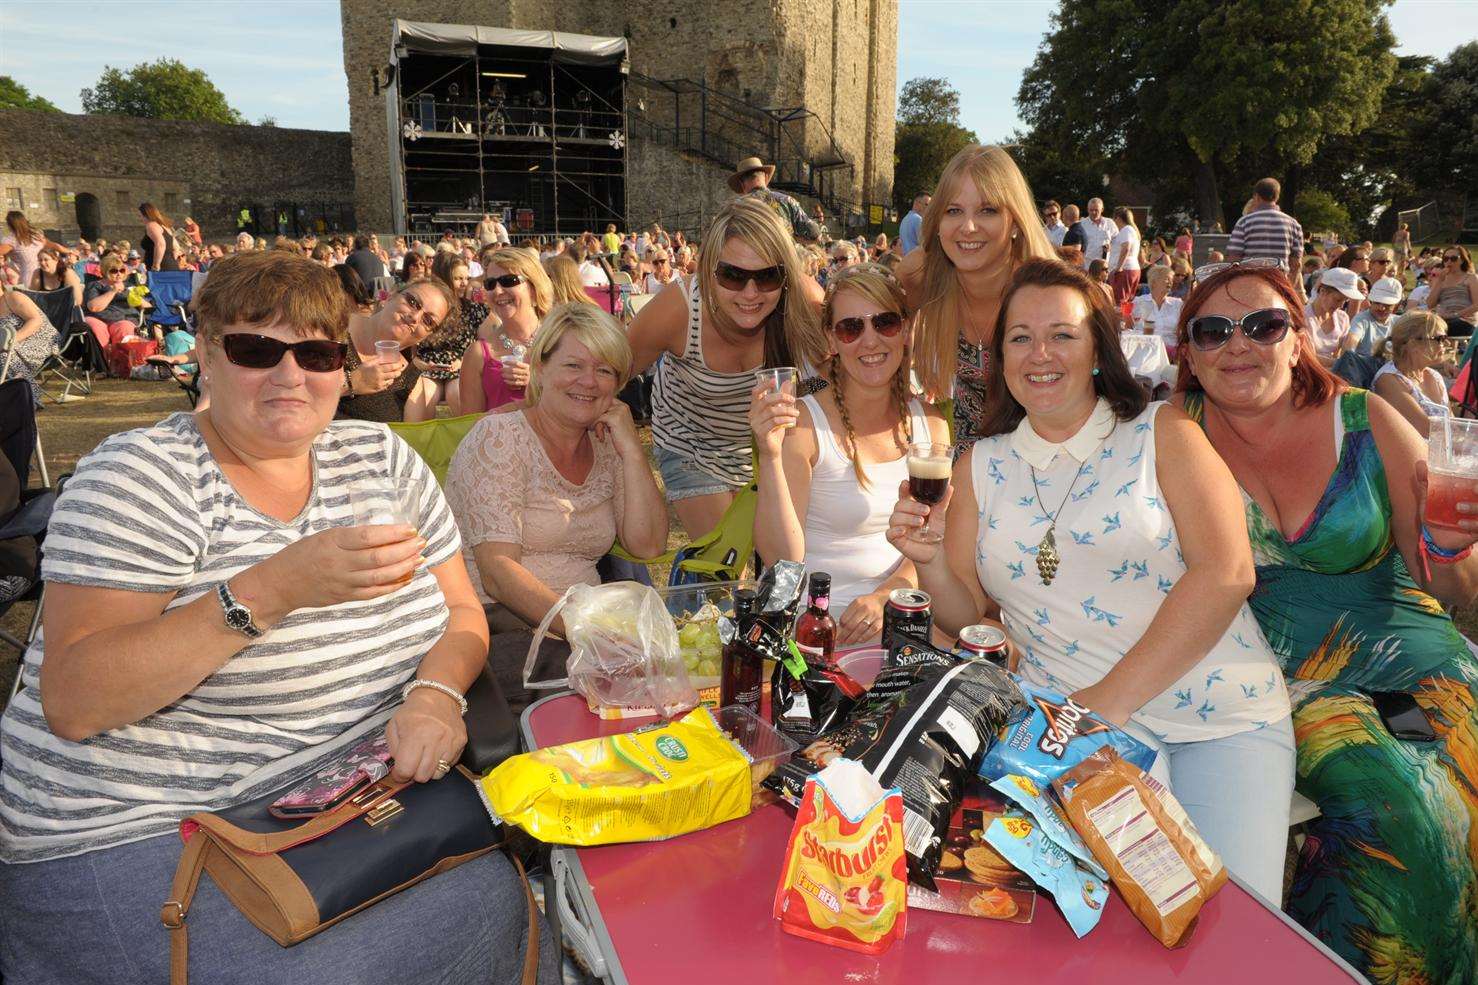 Enjoying the atmosphere at the Castle Concerts